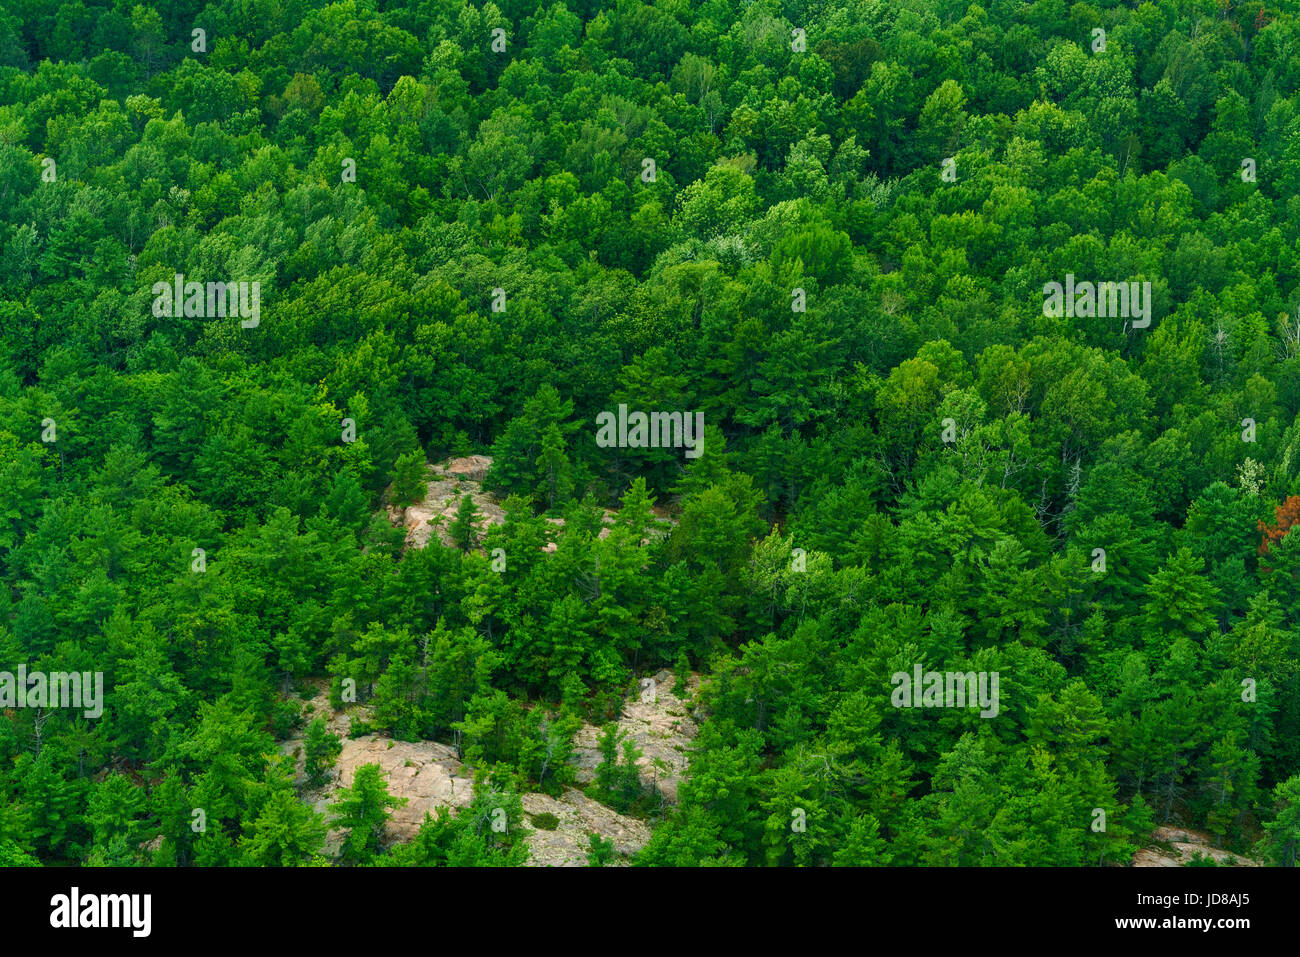 Aerial view of large area of trees, Toronto, Ontario, Canada. aerial picture from ontario canada 2016 Stock Photo